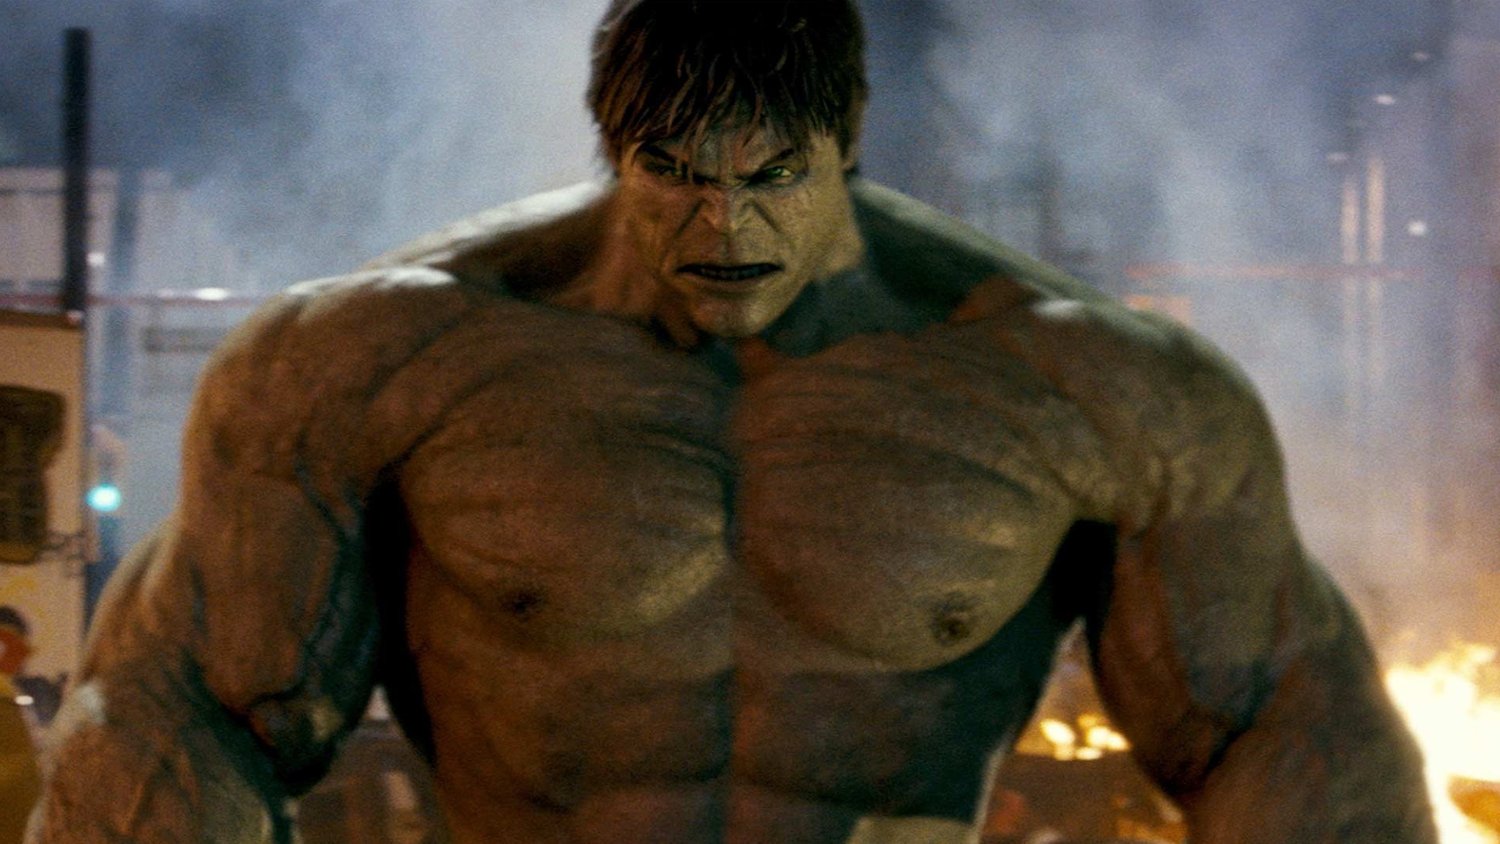 THE INCREDIBLE HULK Director Says a Sequel Would Have Introduced Variant Hulks